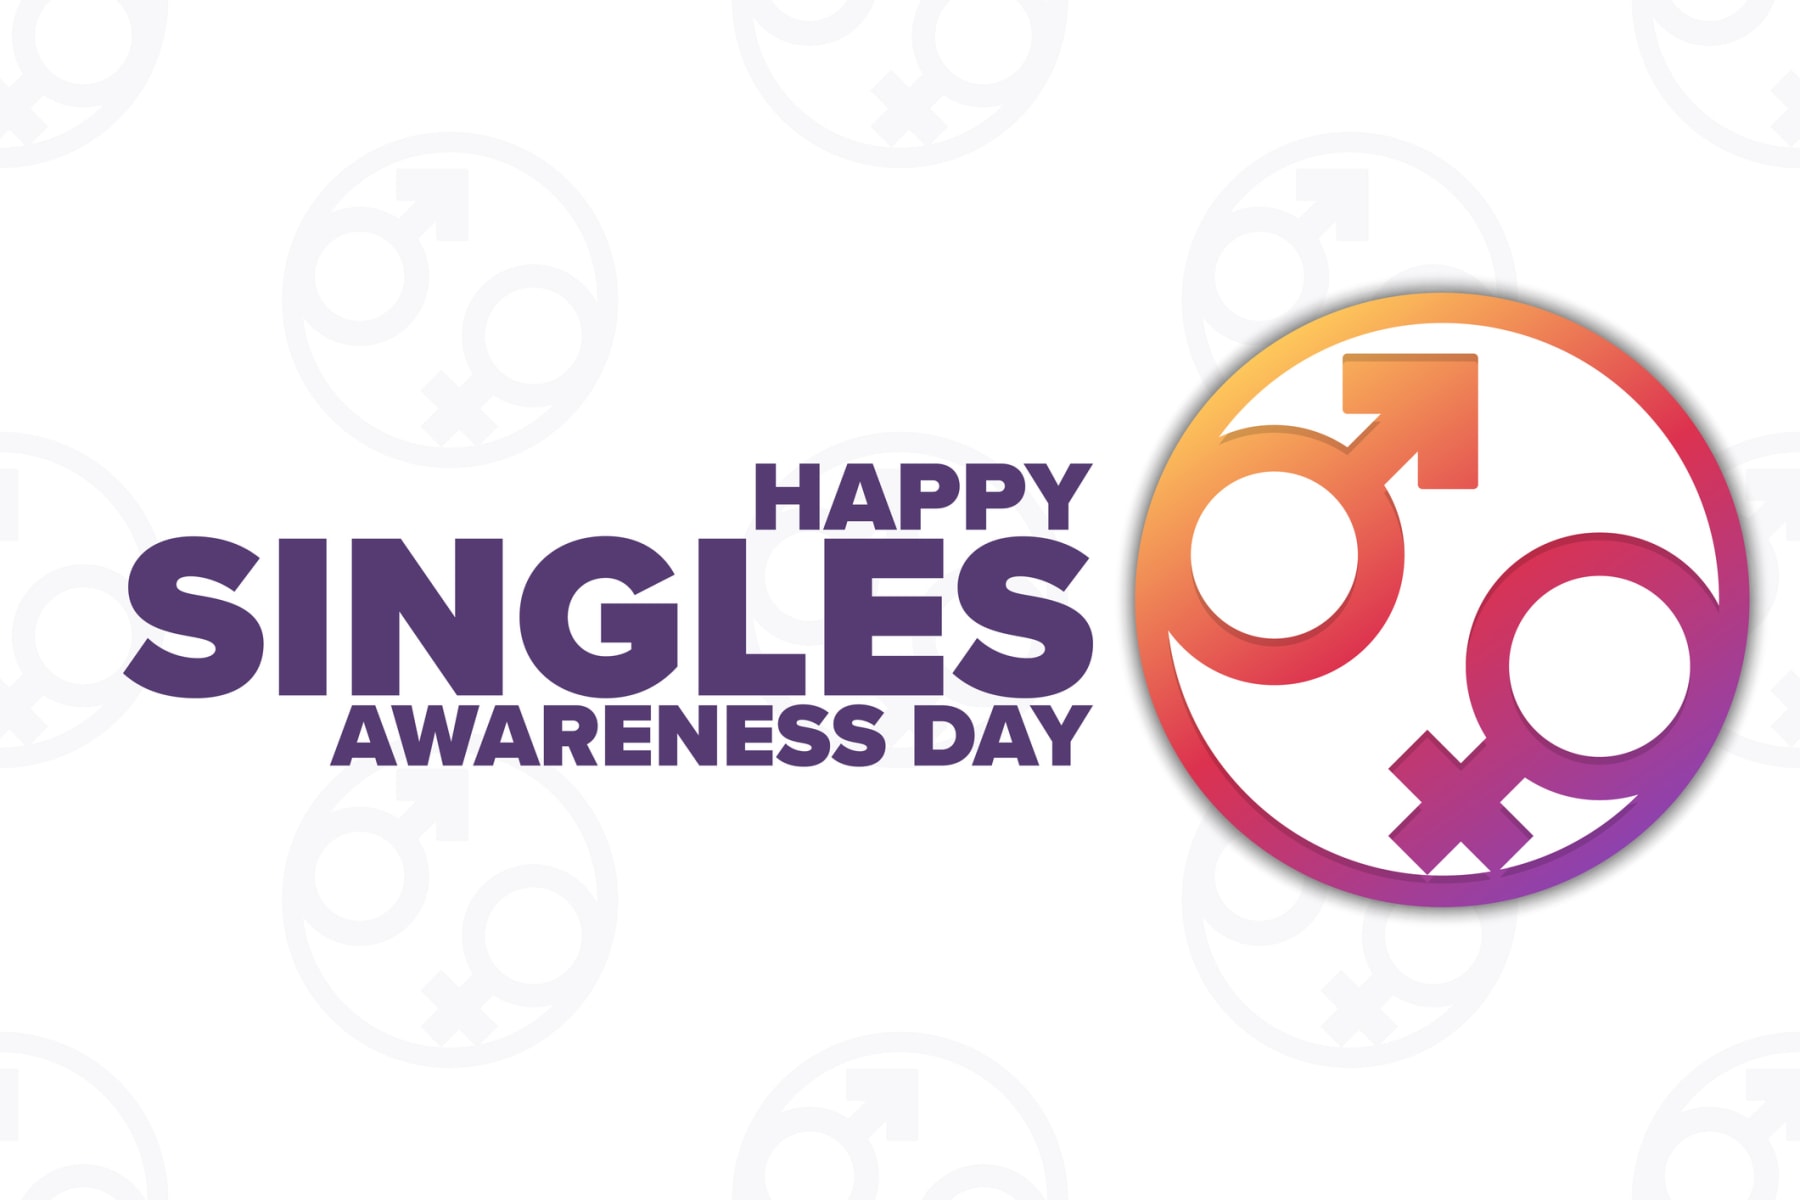 Happy Singles Awareness Day with the biological sex symbols for male and female within a circle.